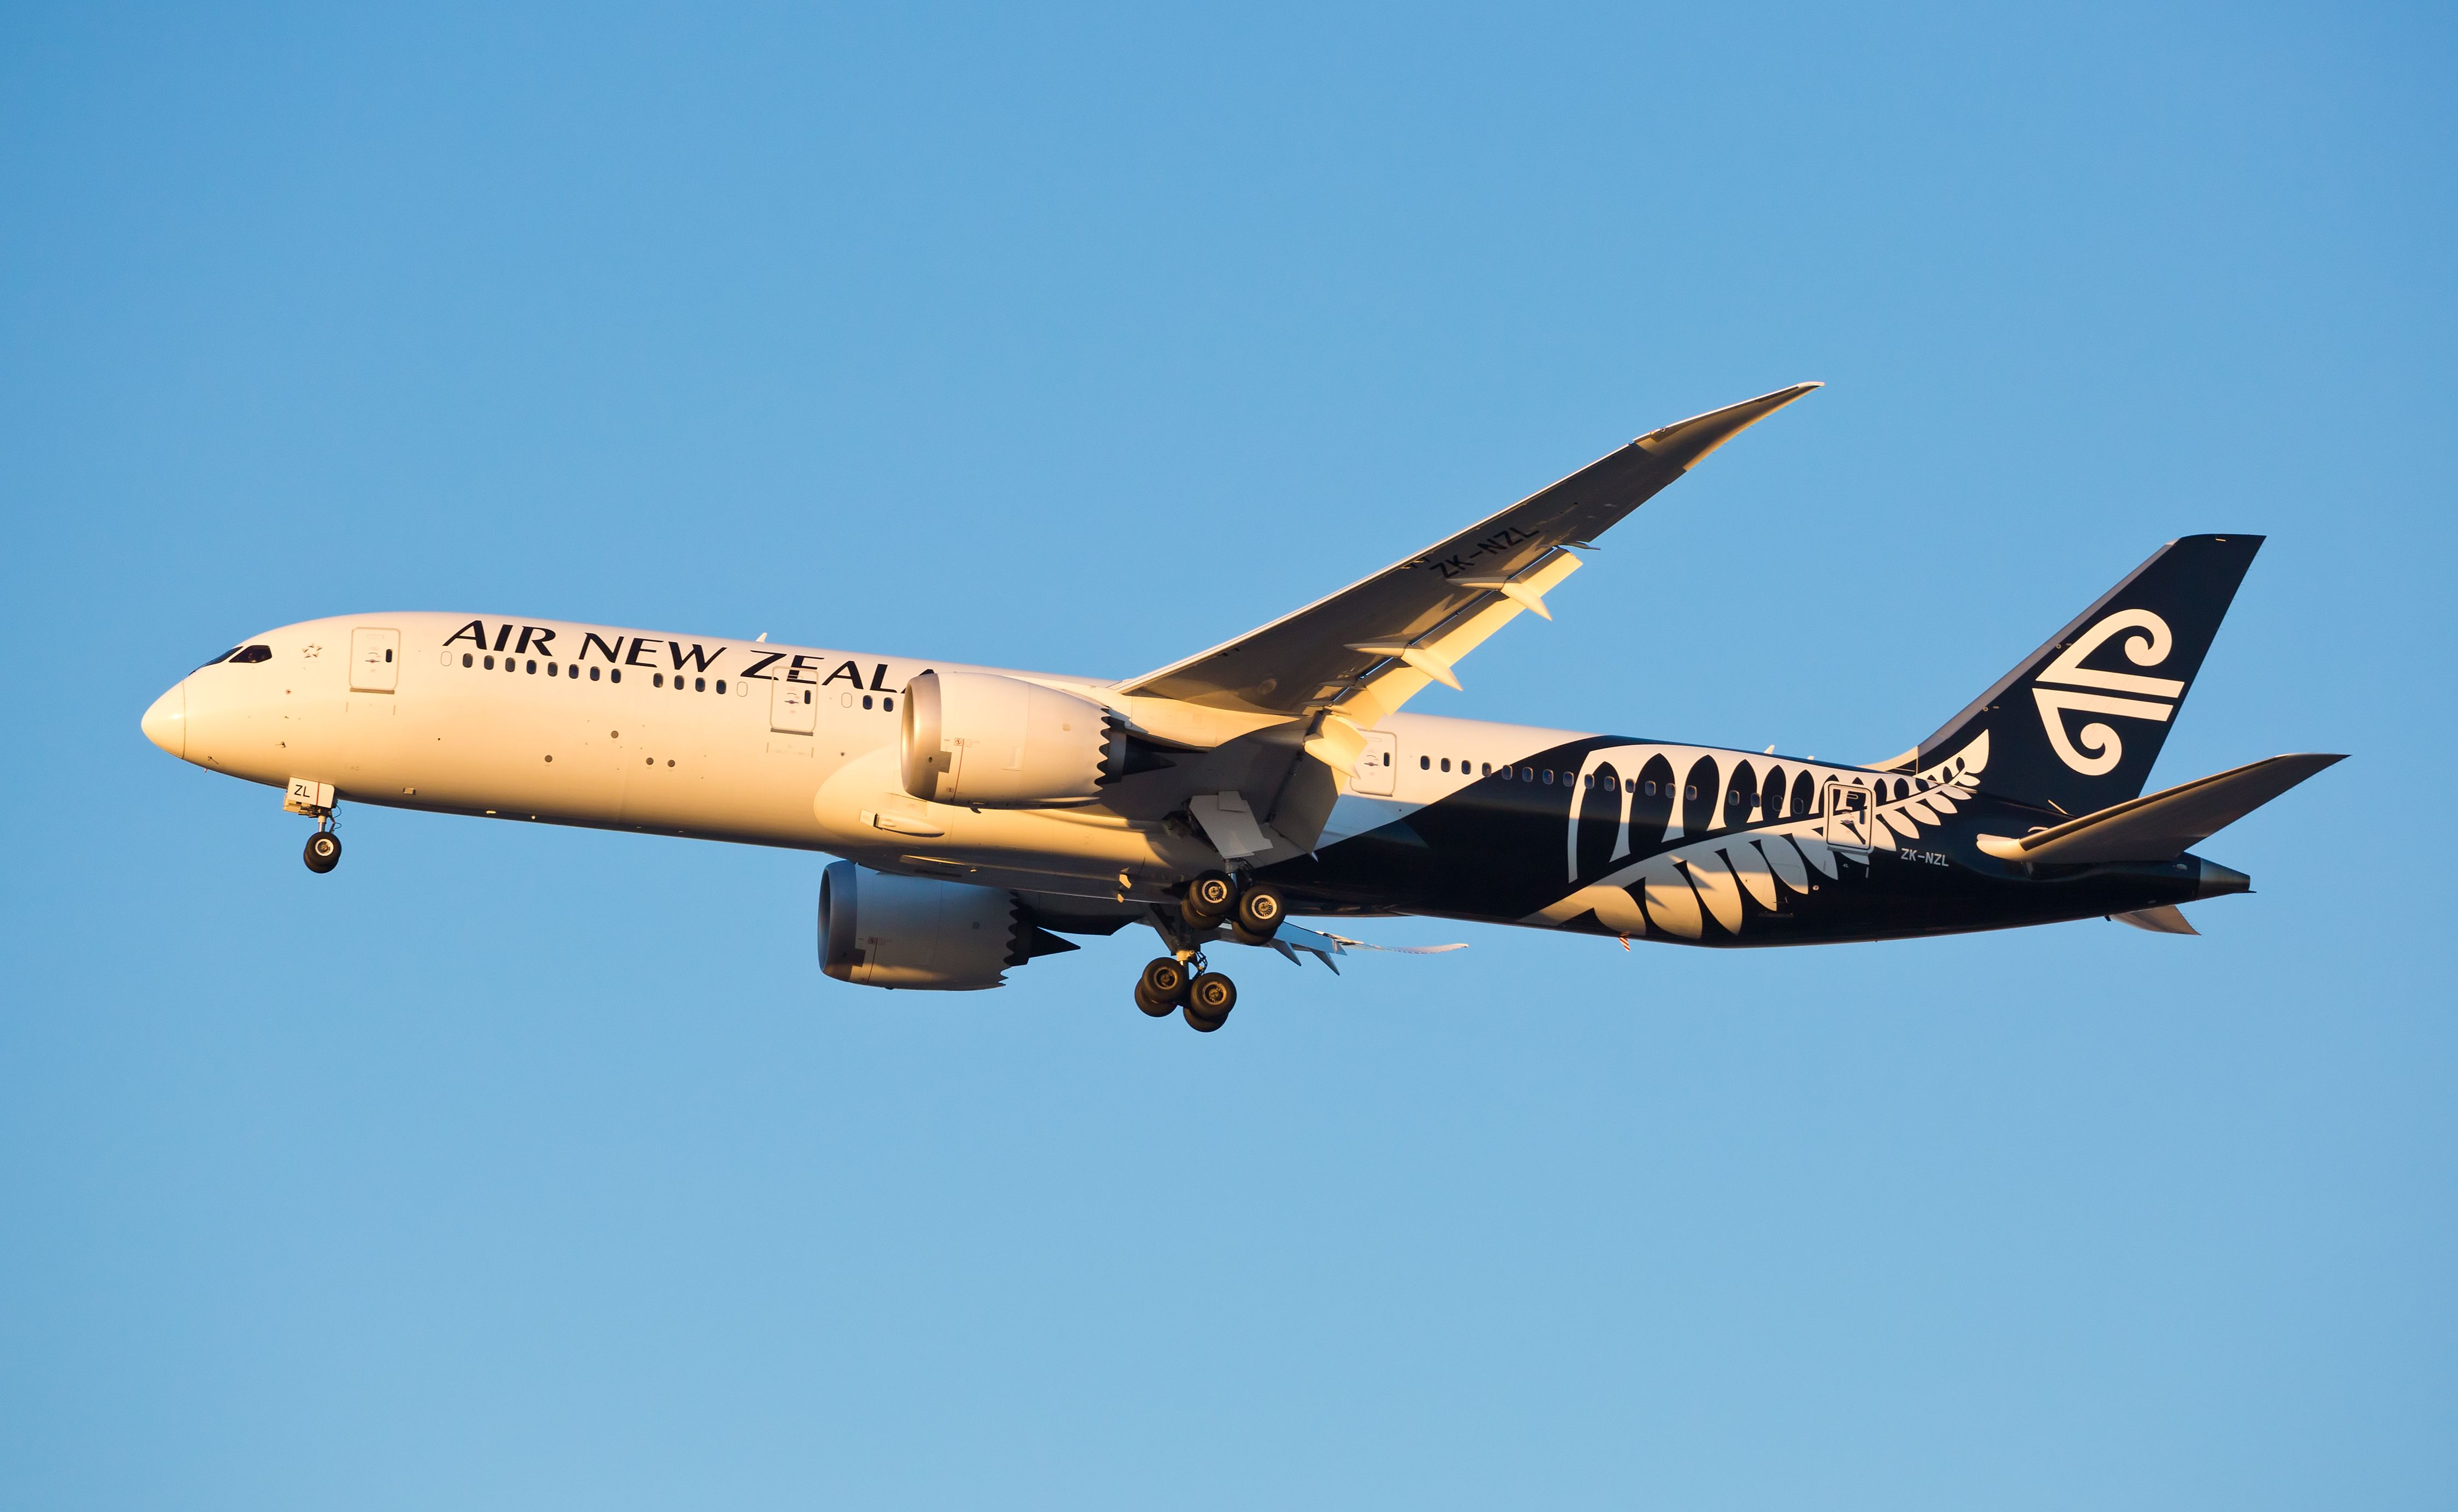 An Air New Zealand Boeing 787-9 Dreamliner Flying in the sky.